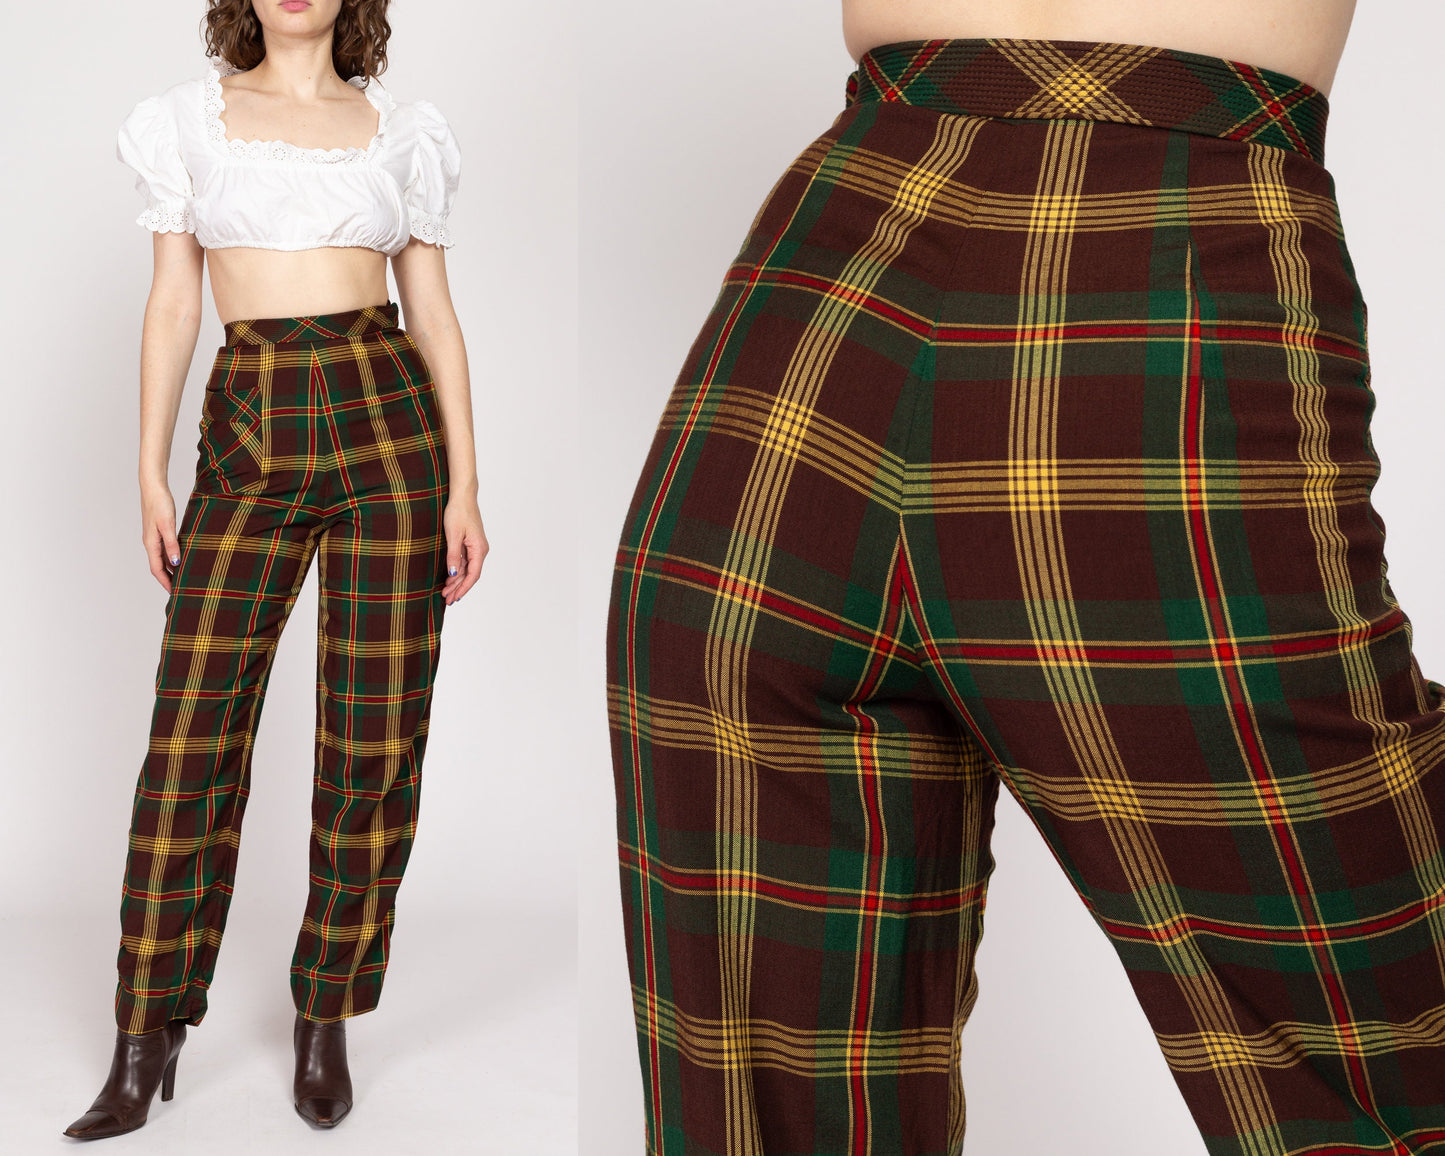 XS 1940s Koret Plaid High Waisted Girdlslax Side Zip Trousers 24" | Retro Vintage 40s Brown Yellow Tapered Leg Pants